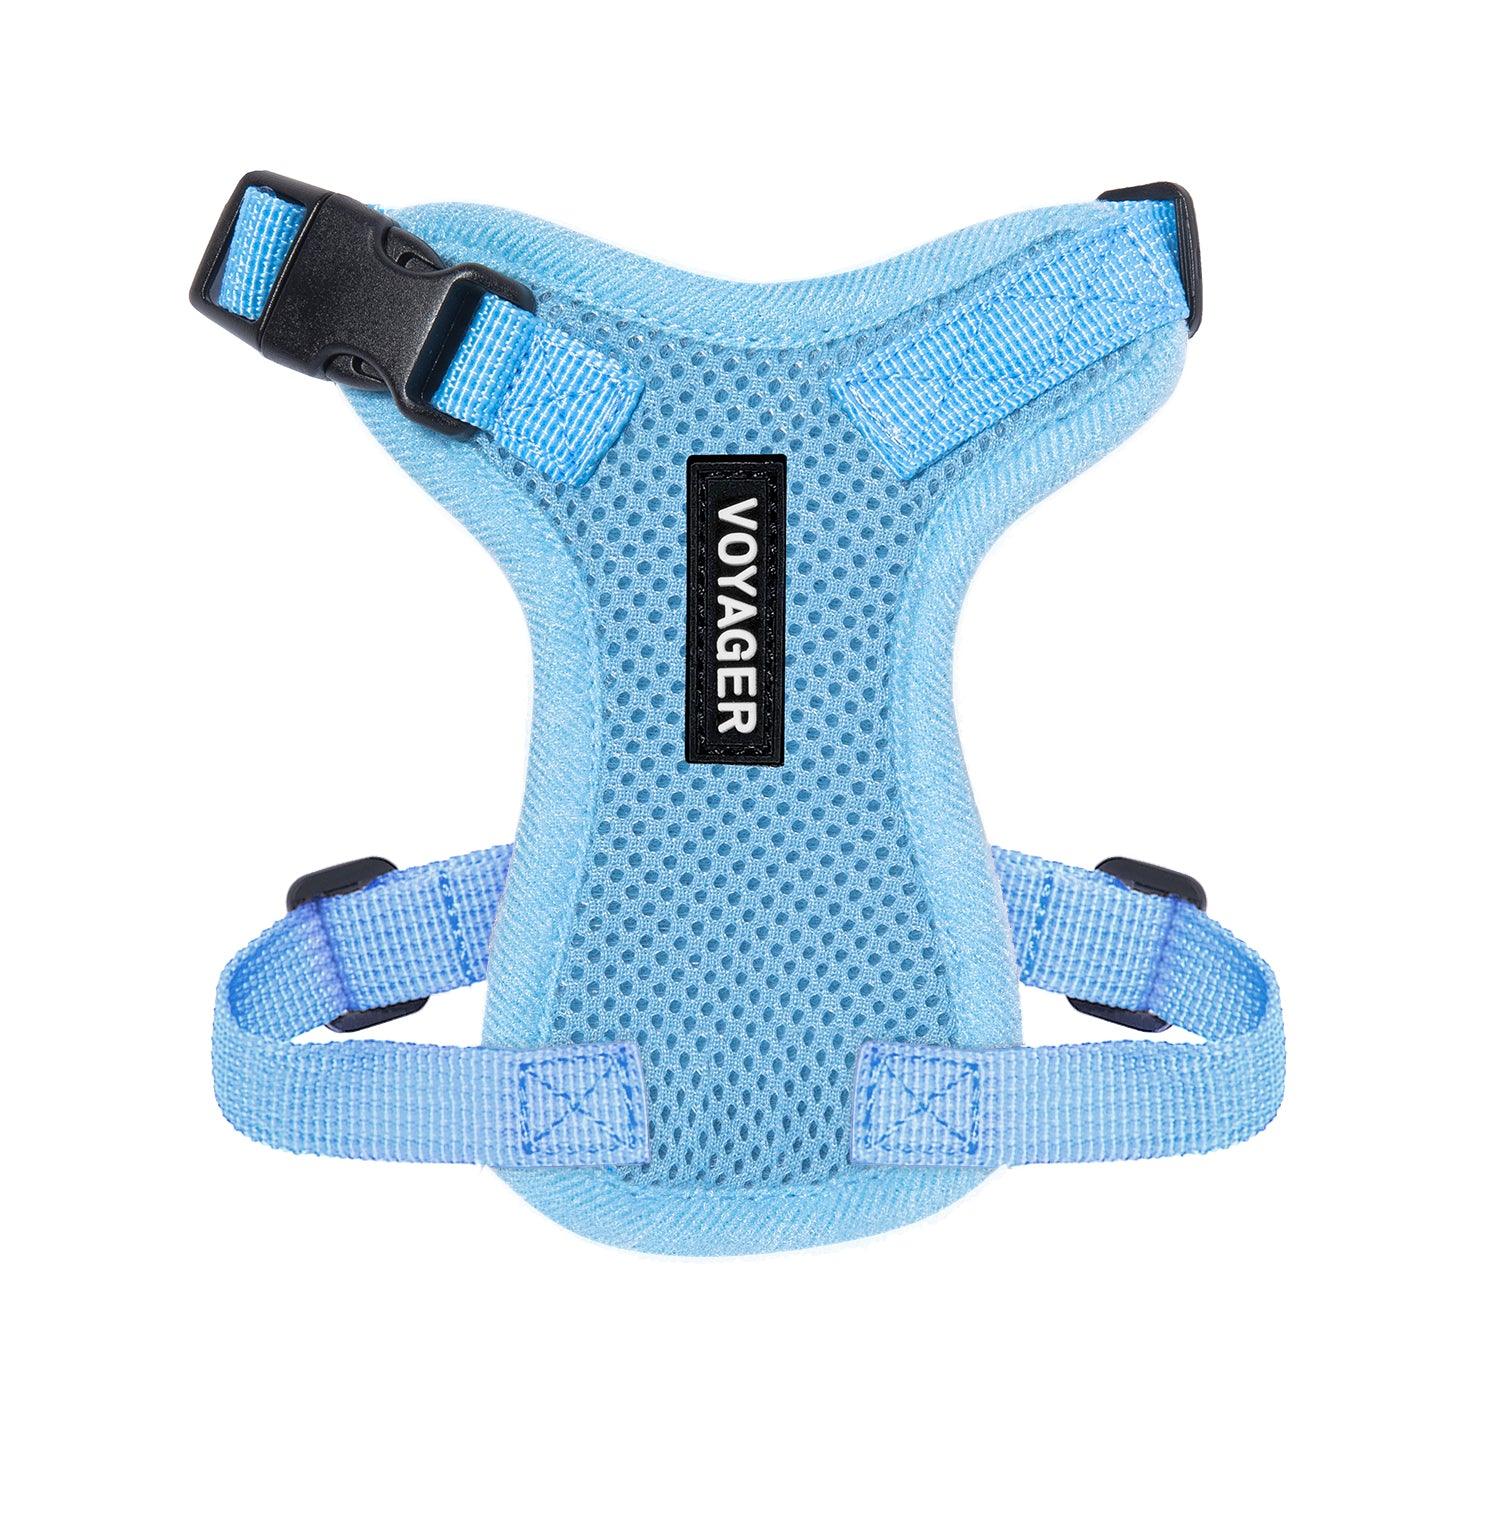 Step-In Lock Pet Harness - VOYAGER Dog Harnesses